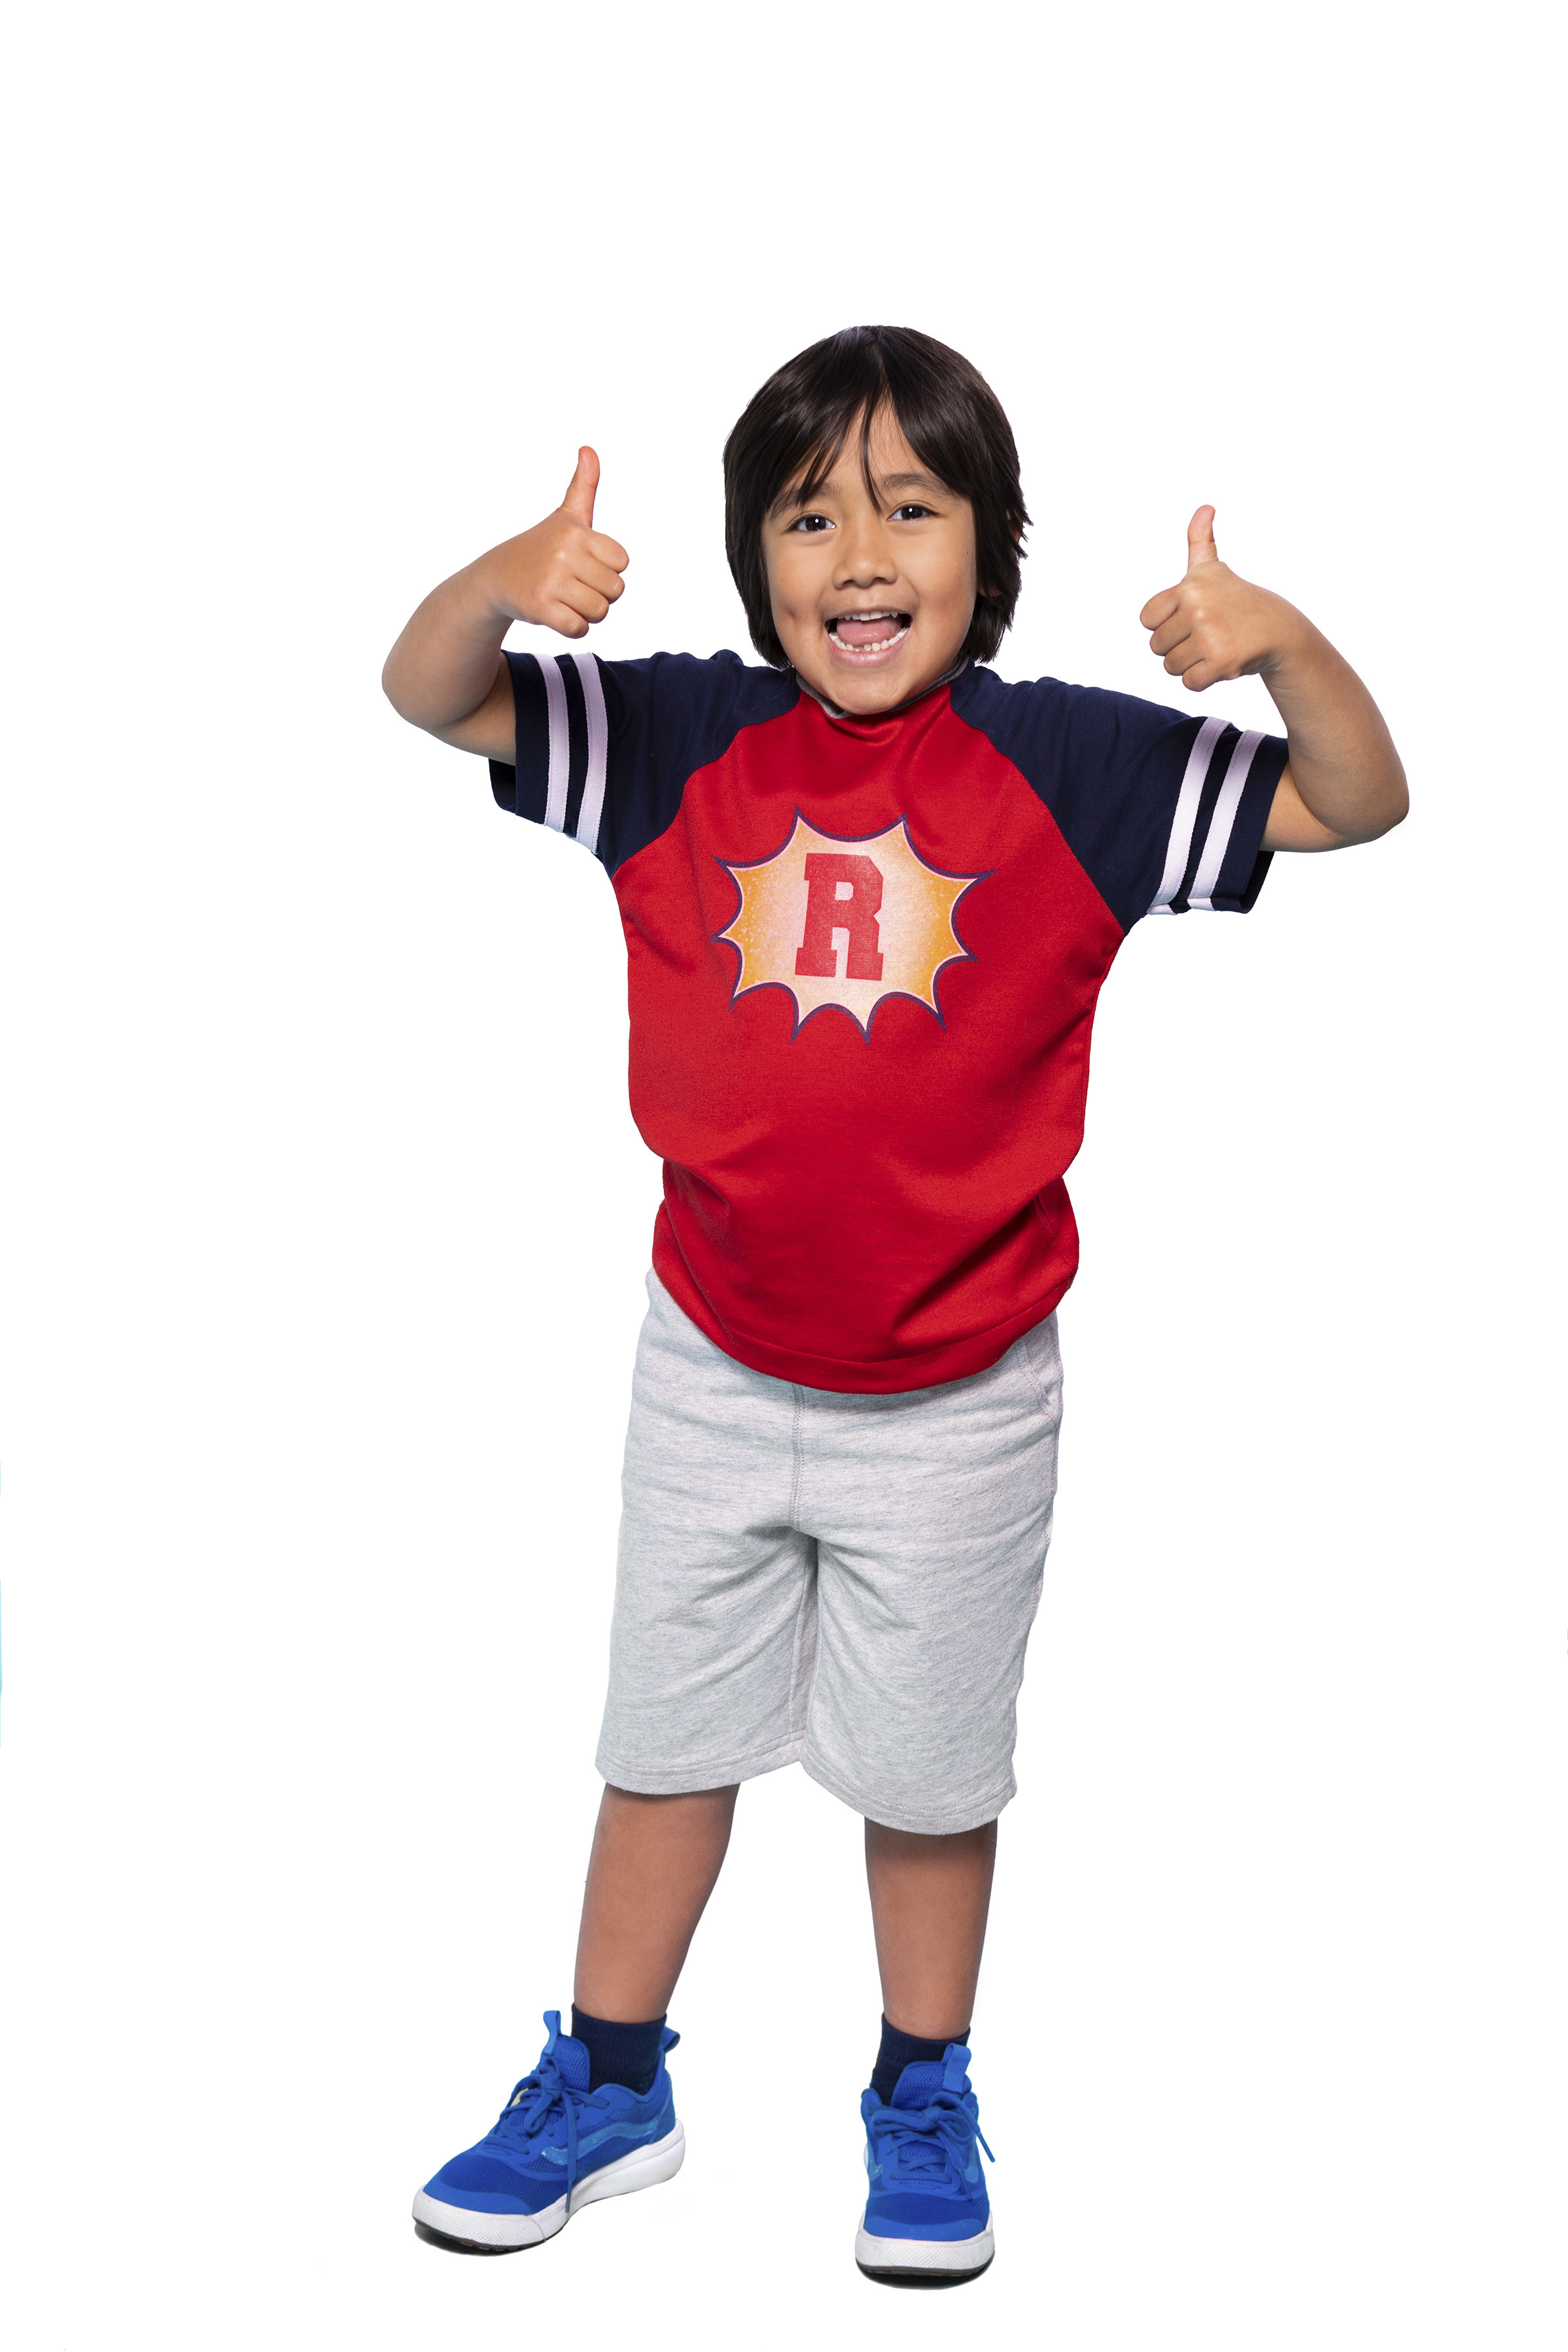 Nickelodeon Unboxes Playful New Preschool Series Ryan's Mystery Playdate,  Starring YouTube Superstar Ryan of Ryan ToysReview, Friday, April 19, at  12:30 P.M. (ET/PT) | Business Wire